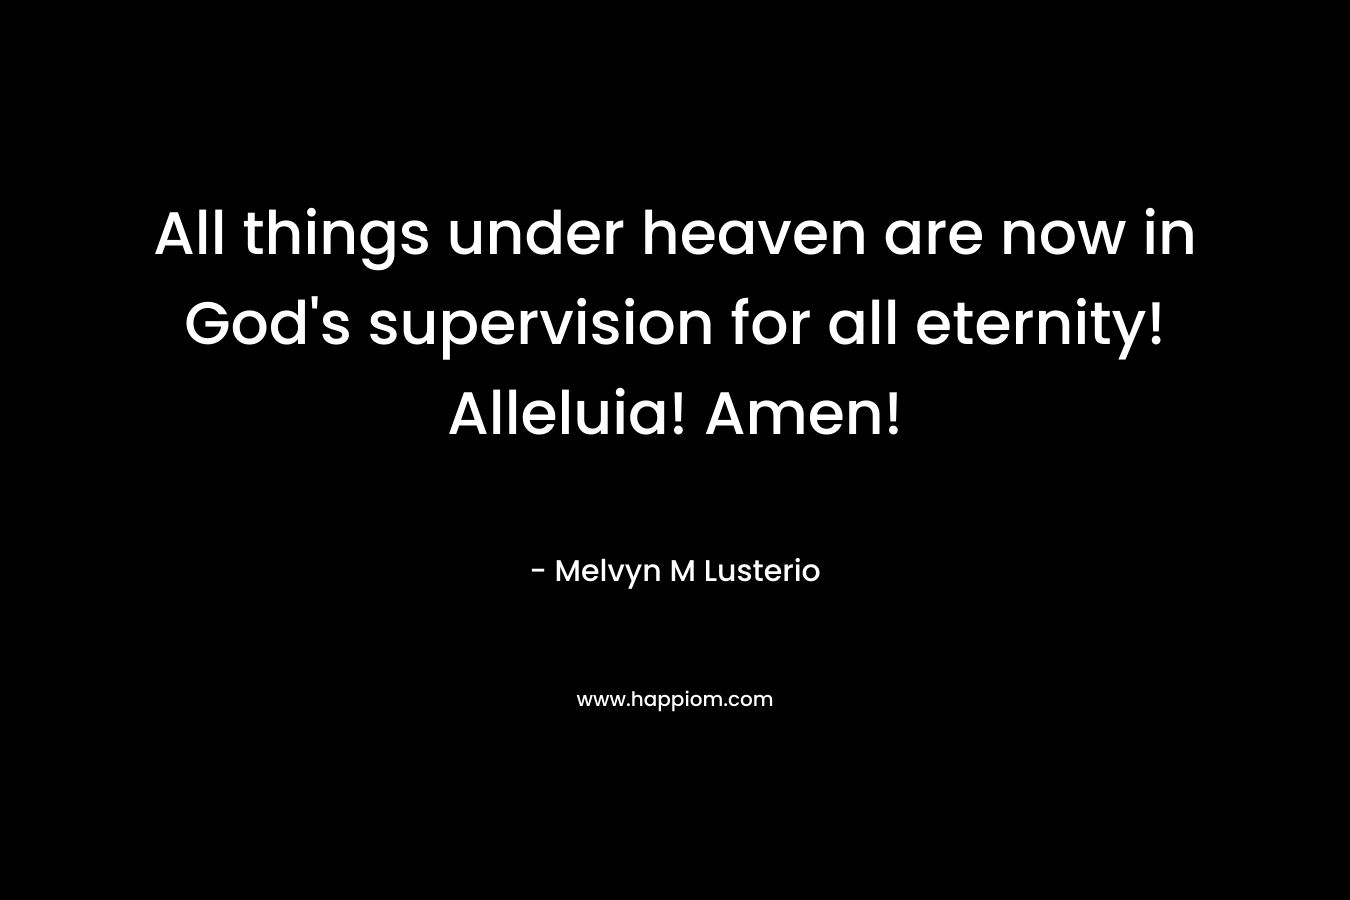 All things under heaven are now in God’s supervision for all eternity! Alleluia! Amen! – Melvyn M Lusterio